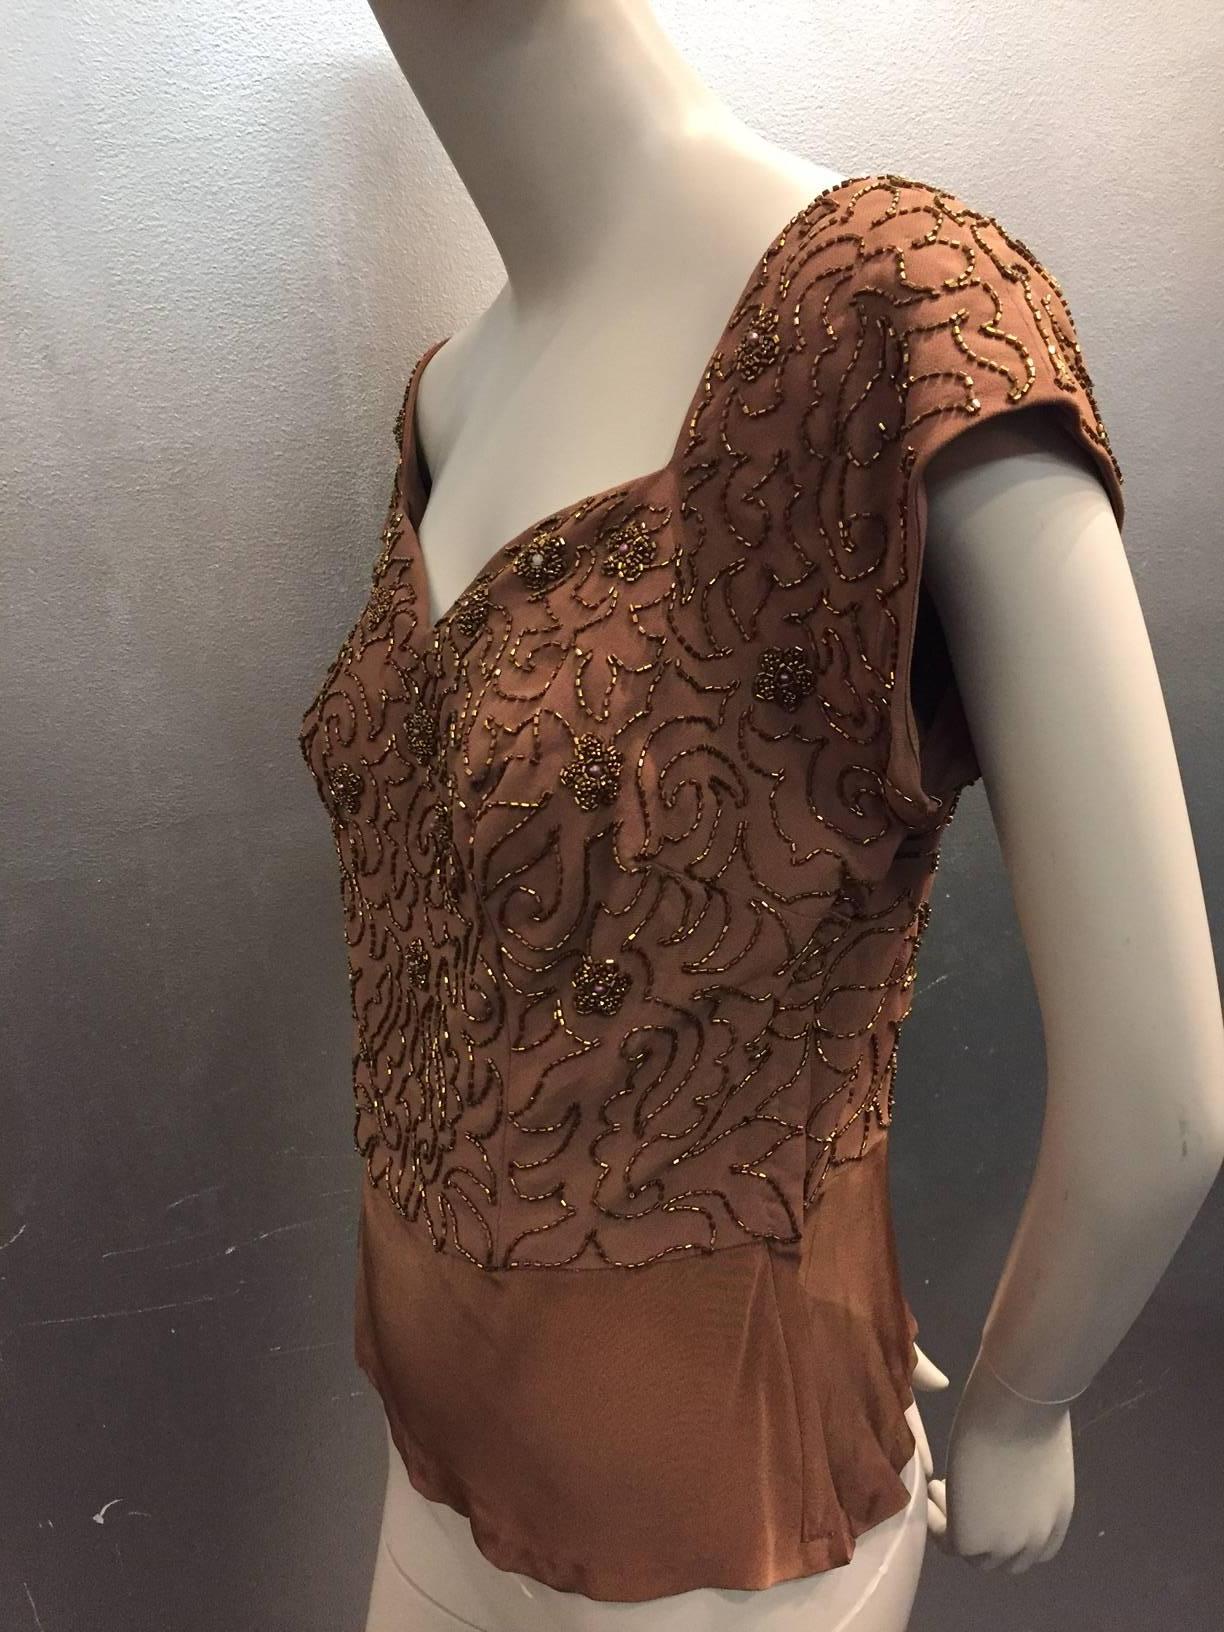 Women's 1950s Mocha Rayon Crepe Evening Top w Sweetheart Neckline and Copper Beading